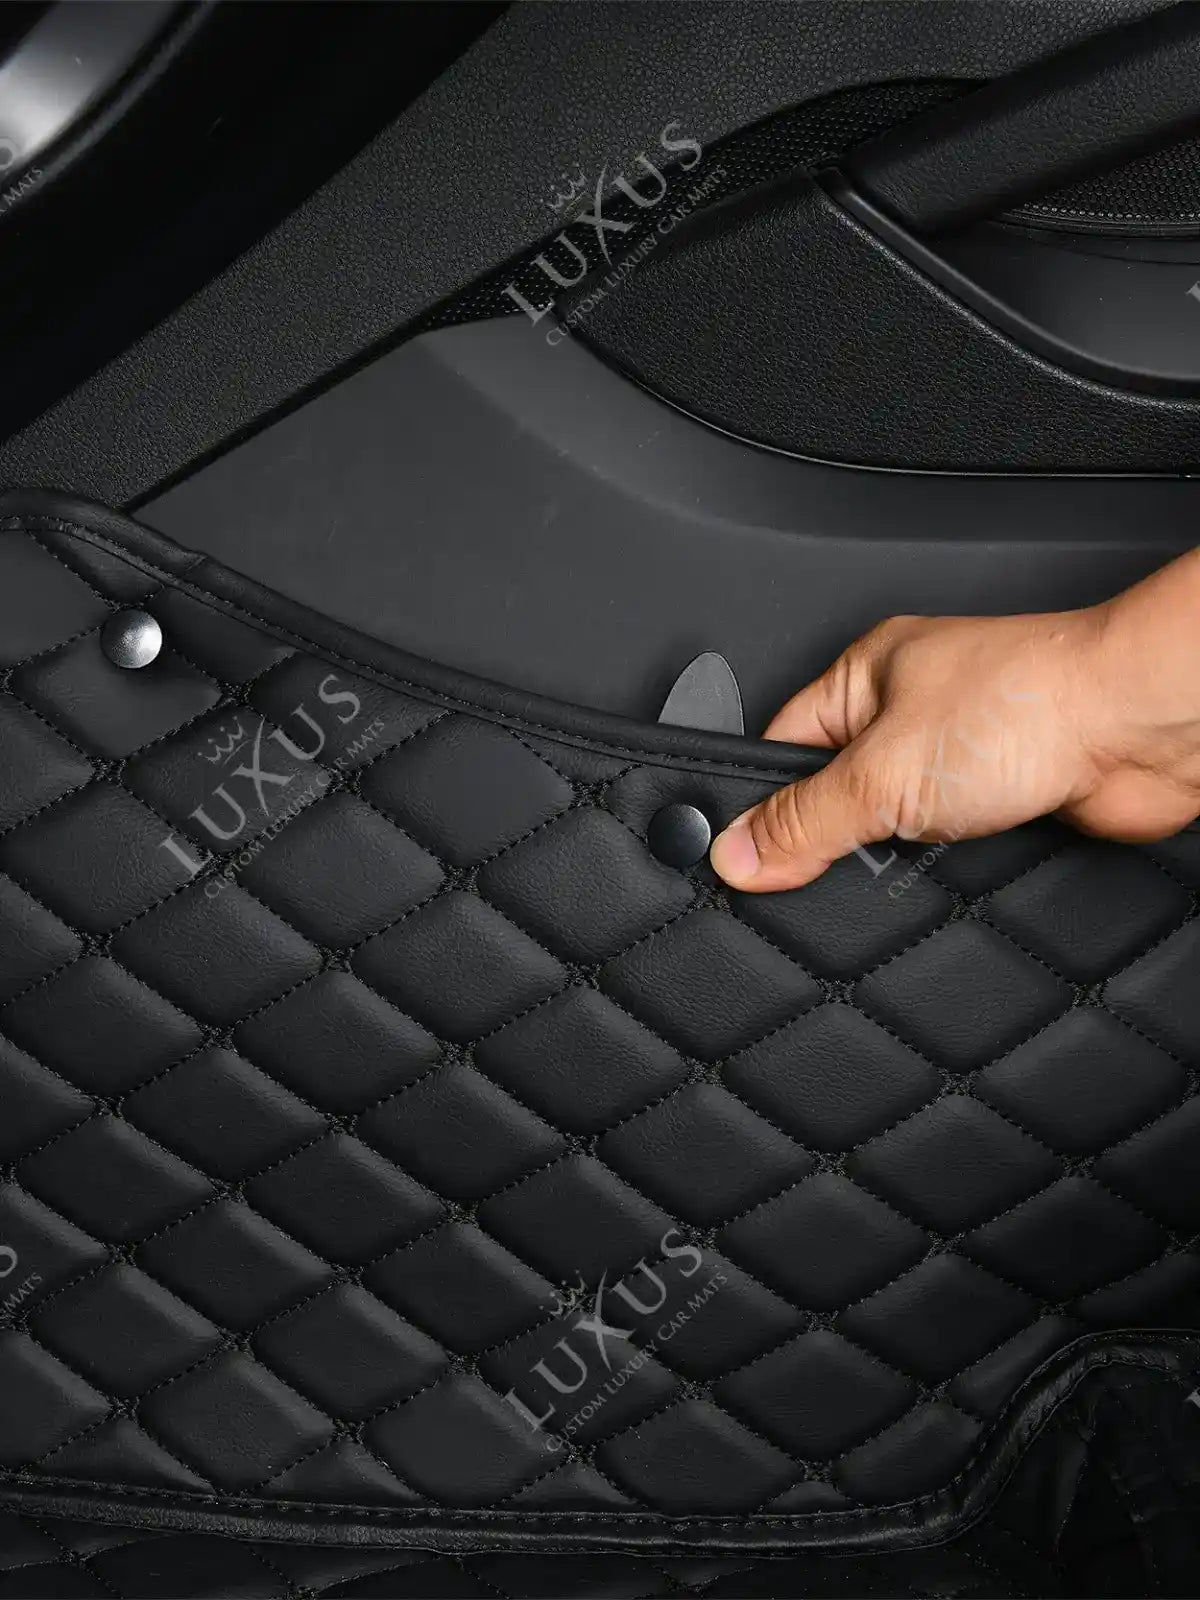 Leather Floor Mats - Quilted Leather  Custom Floor Mats - Beverly Hills  Motoring Accessories